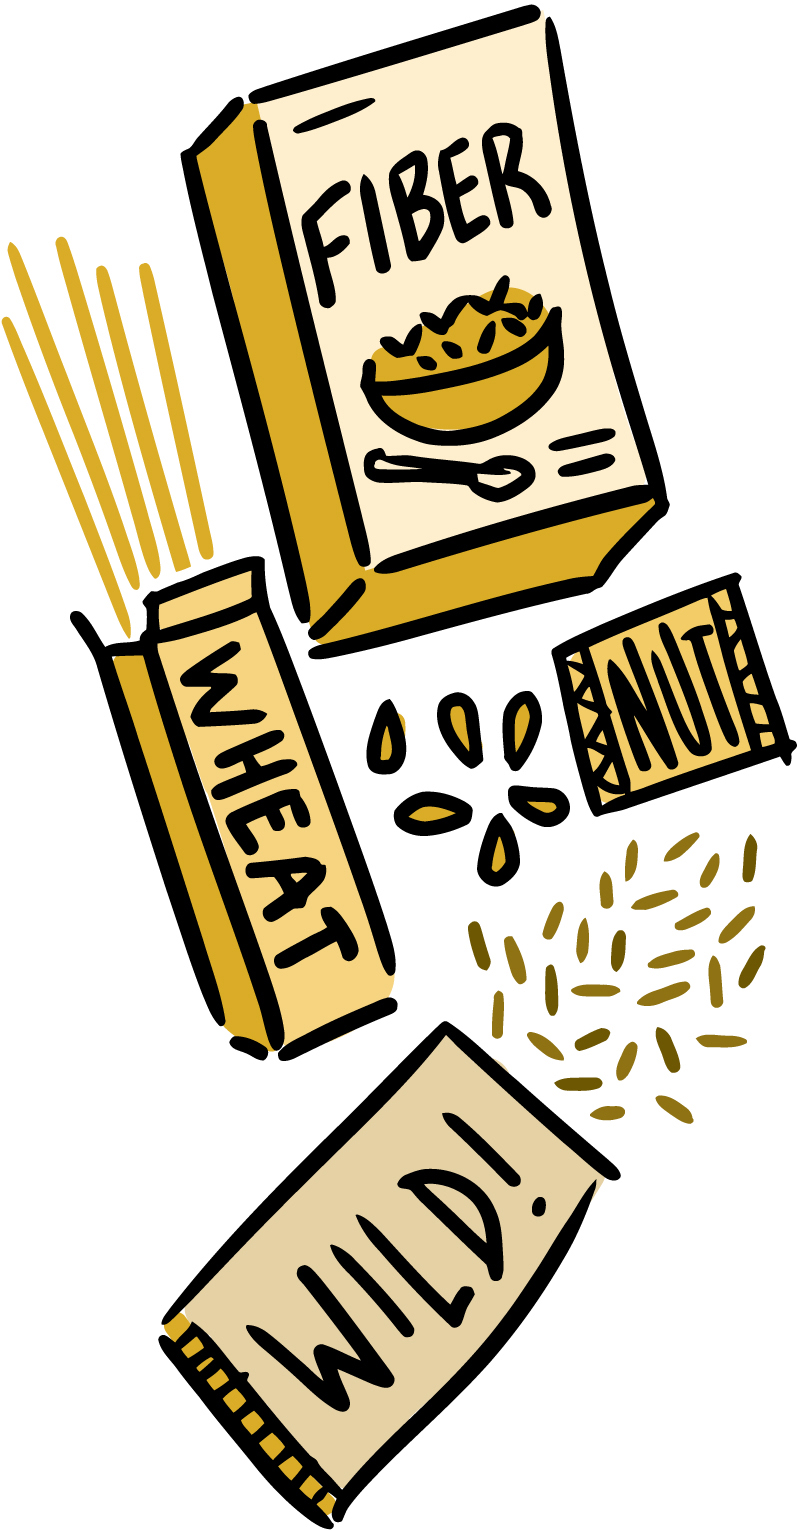 Illustration of a high-fiber cereal, wild rice, whole-wheat pasta and nuts.